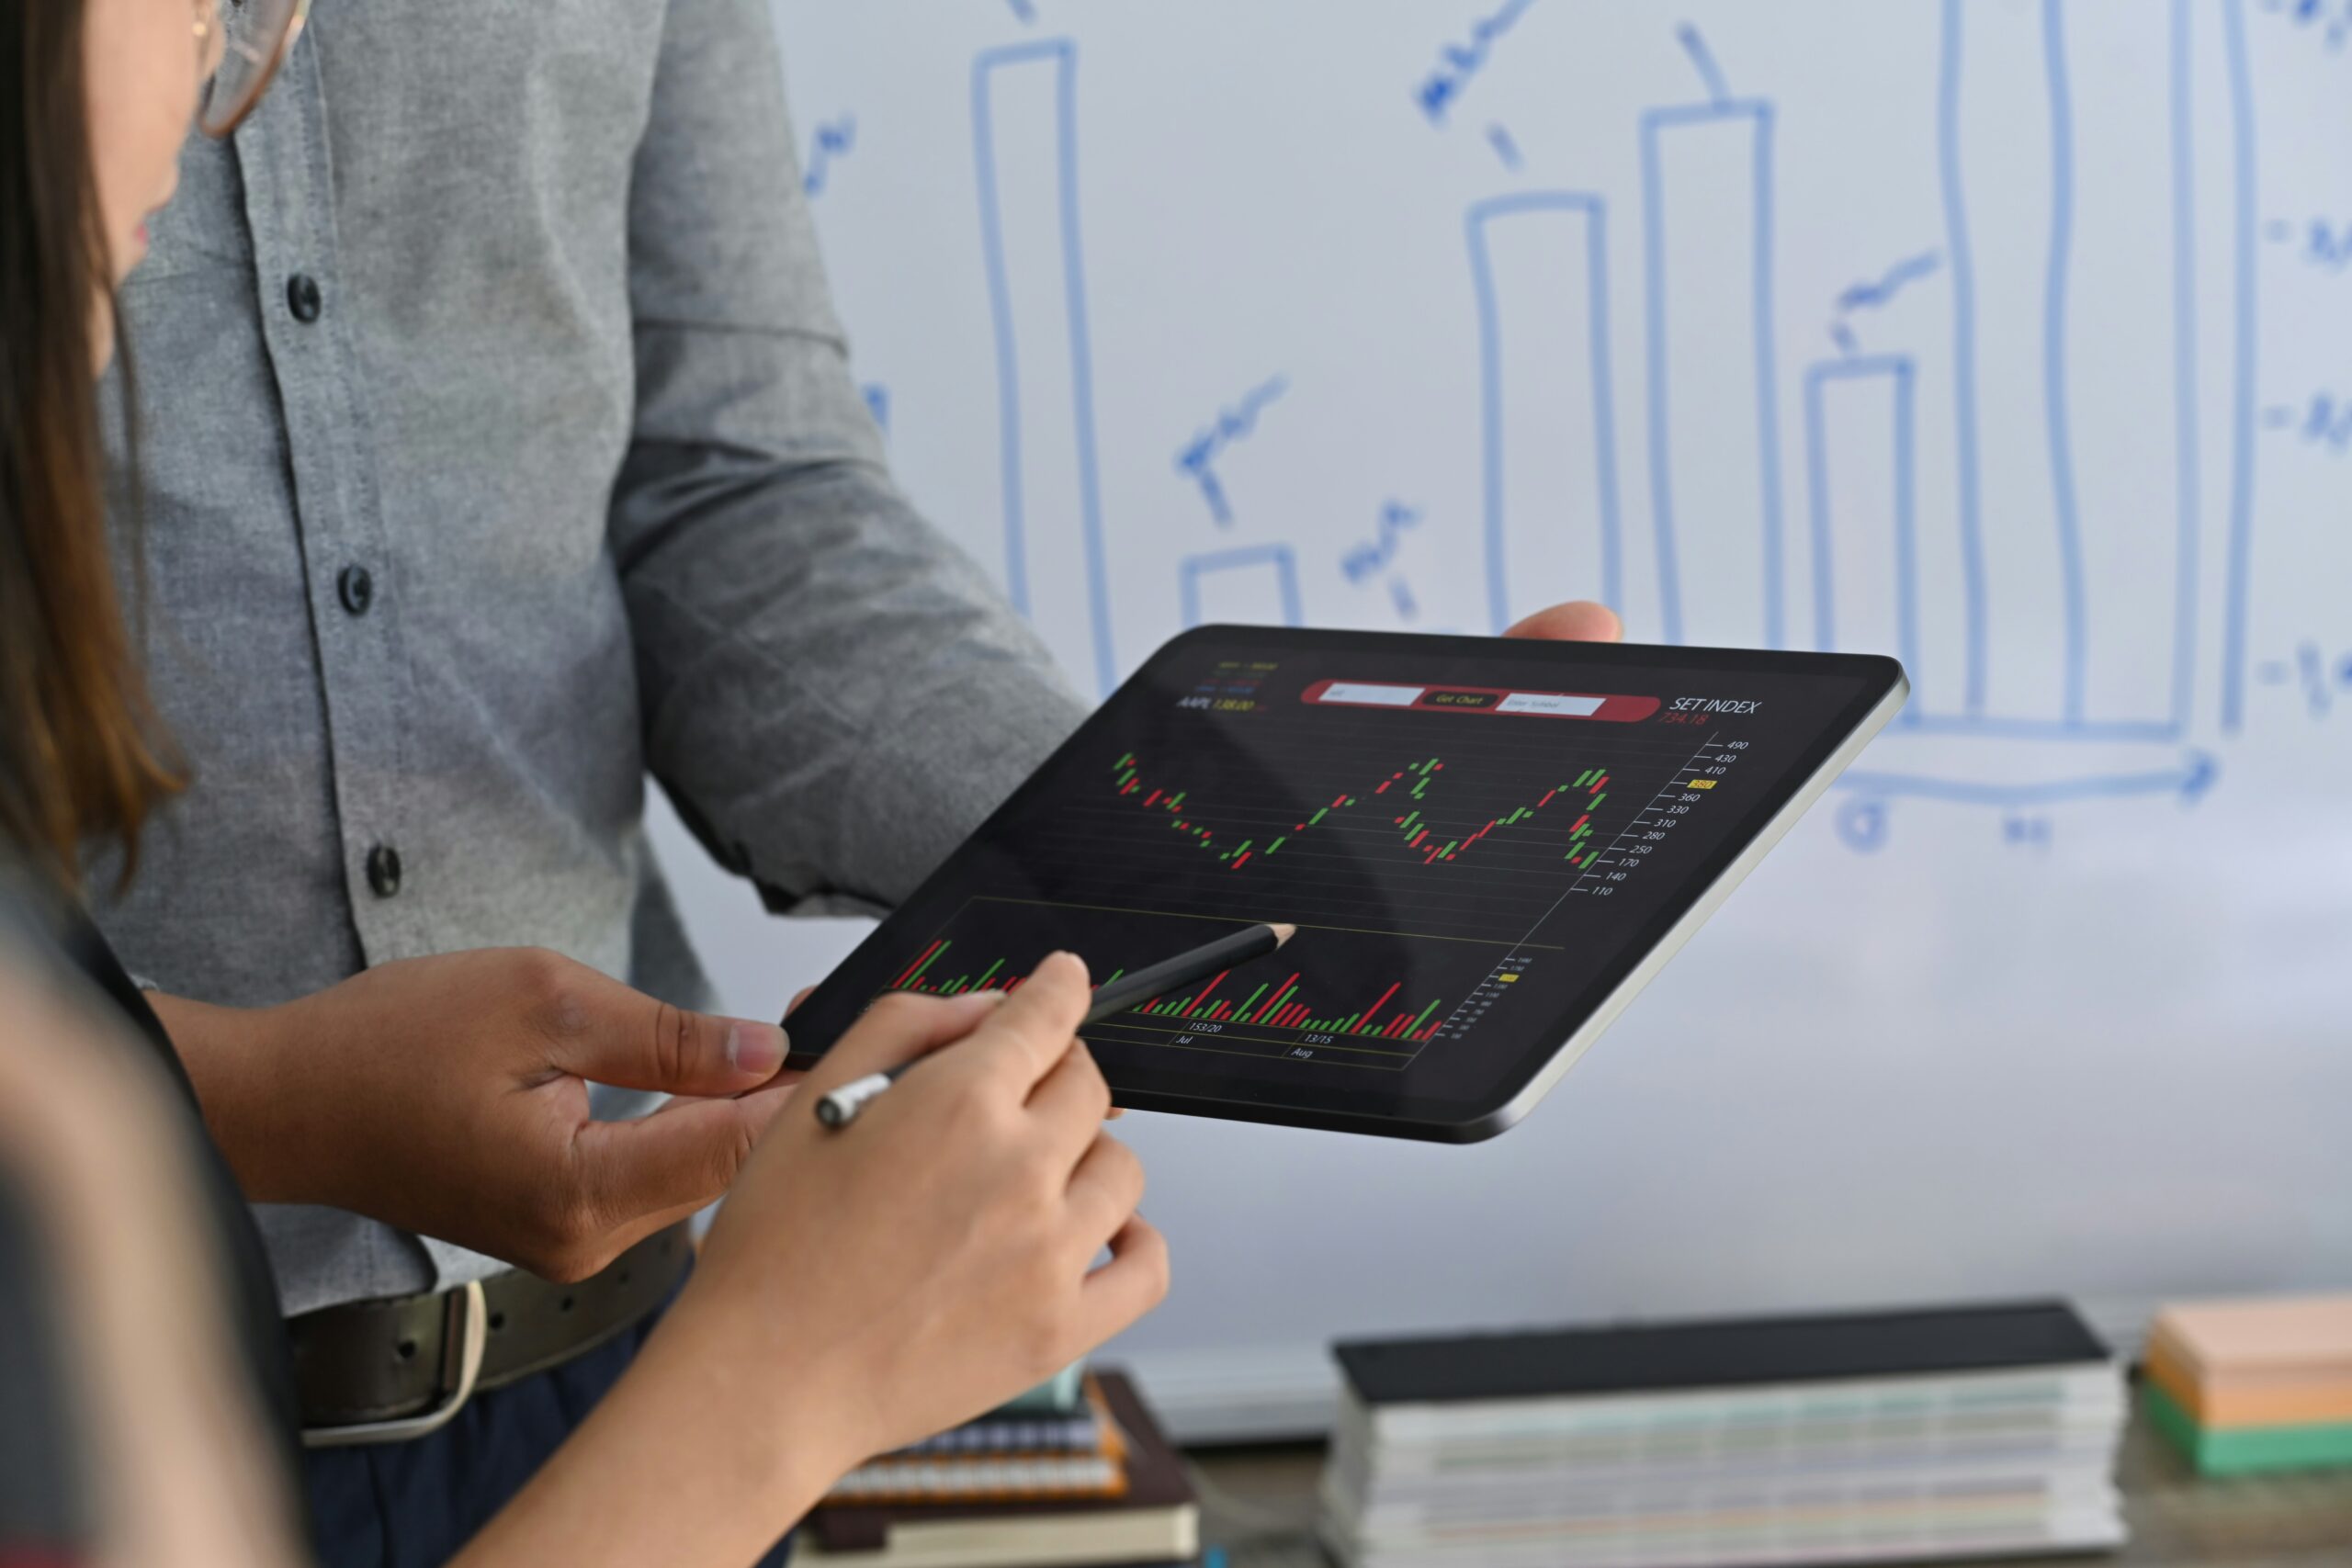 Two individuals analyze stock market data displayed on a tablet in front of a whiteboard with bar charts, discussing how process automation would have made analysis easier.